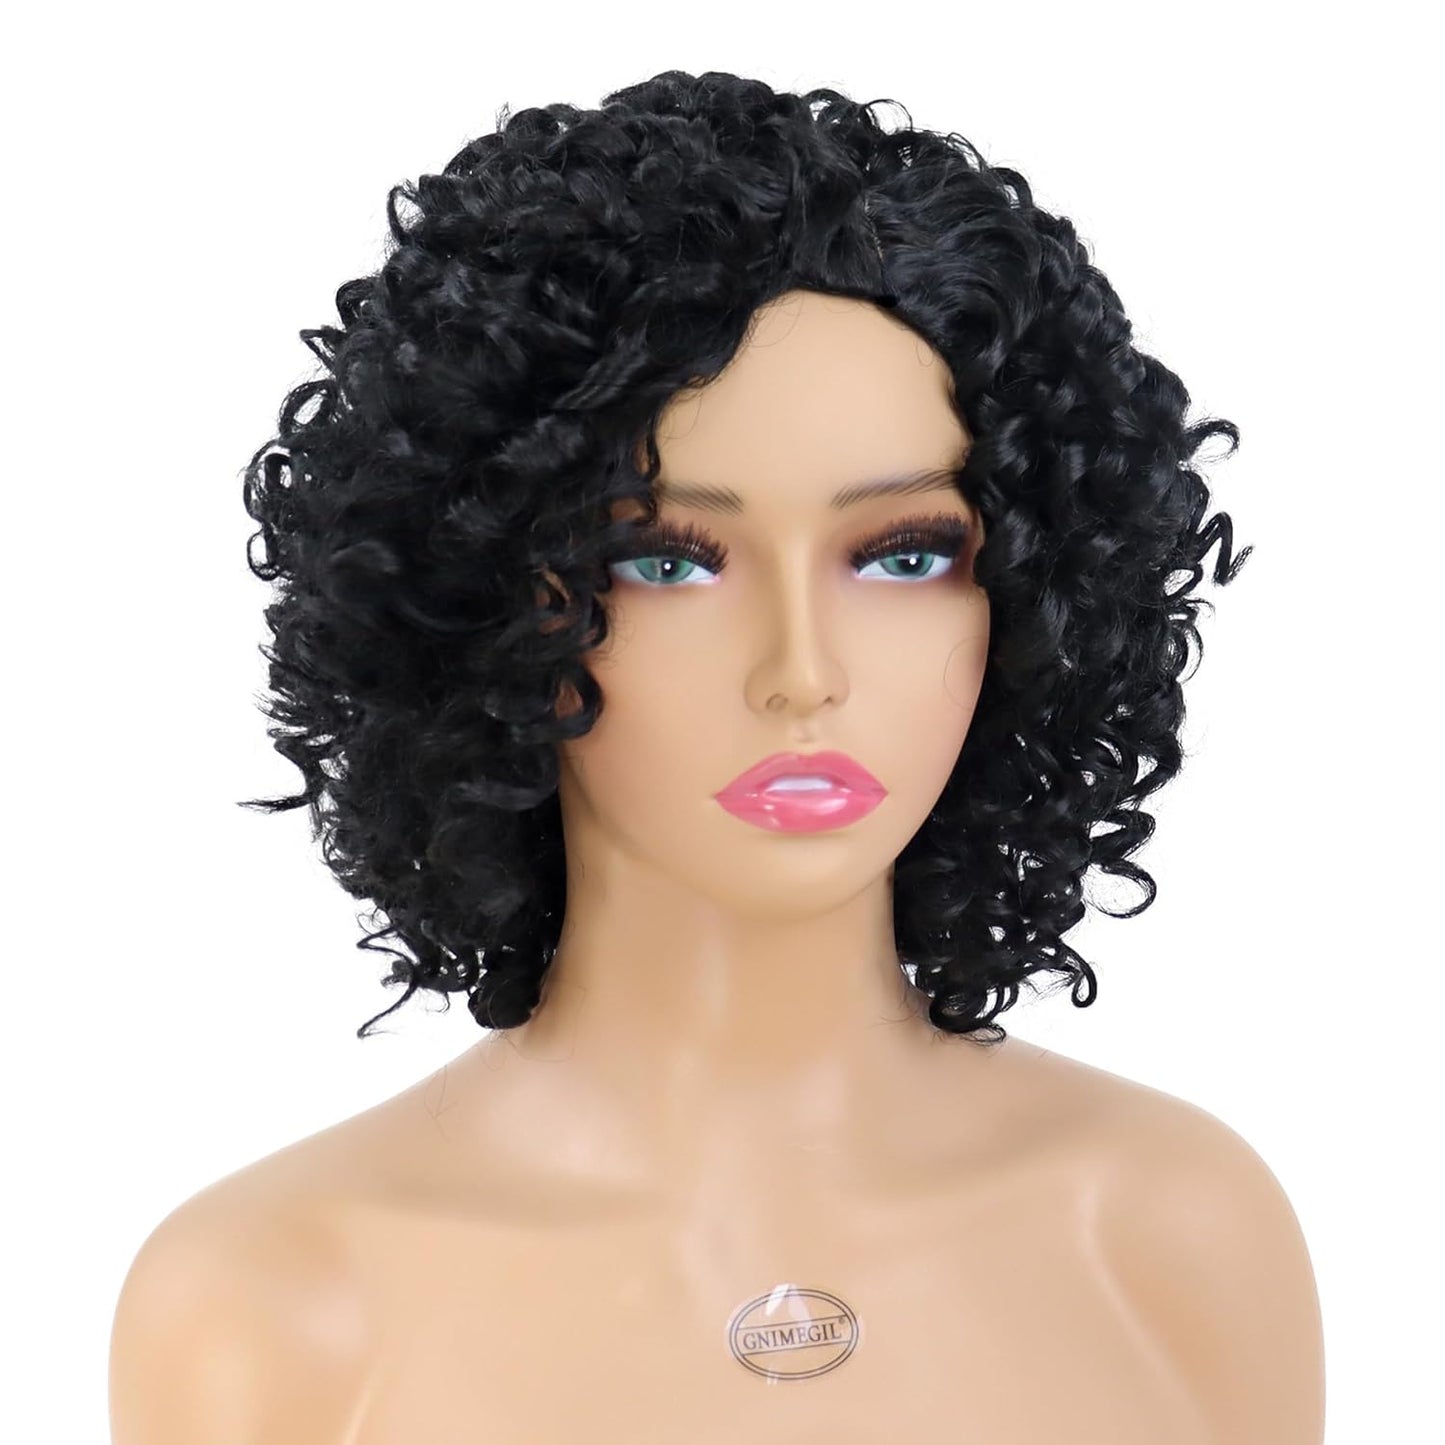 Short Curly Afro Wigs for Black Women Side Bangs Synthetic Wigs Kinky Afro Curly Wig Natural African American Hairstyles Full Hair Glueless Wig